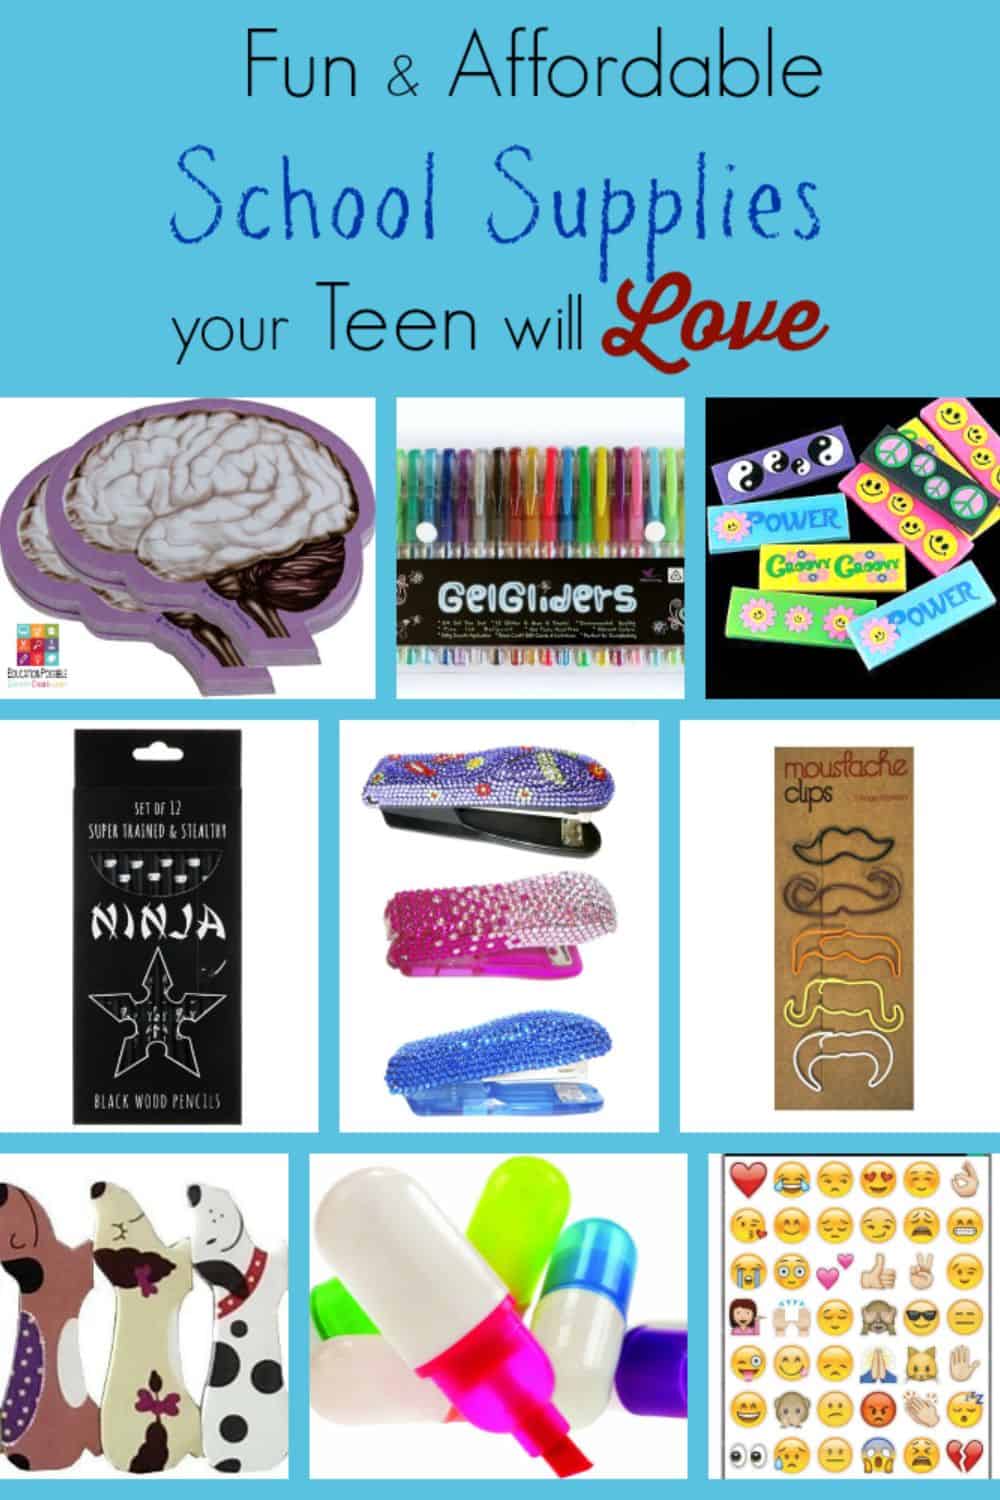 Fun & Affordable School Supplies your Teen will Love